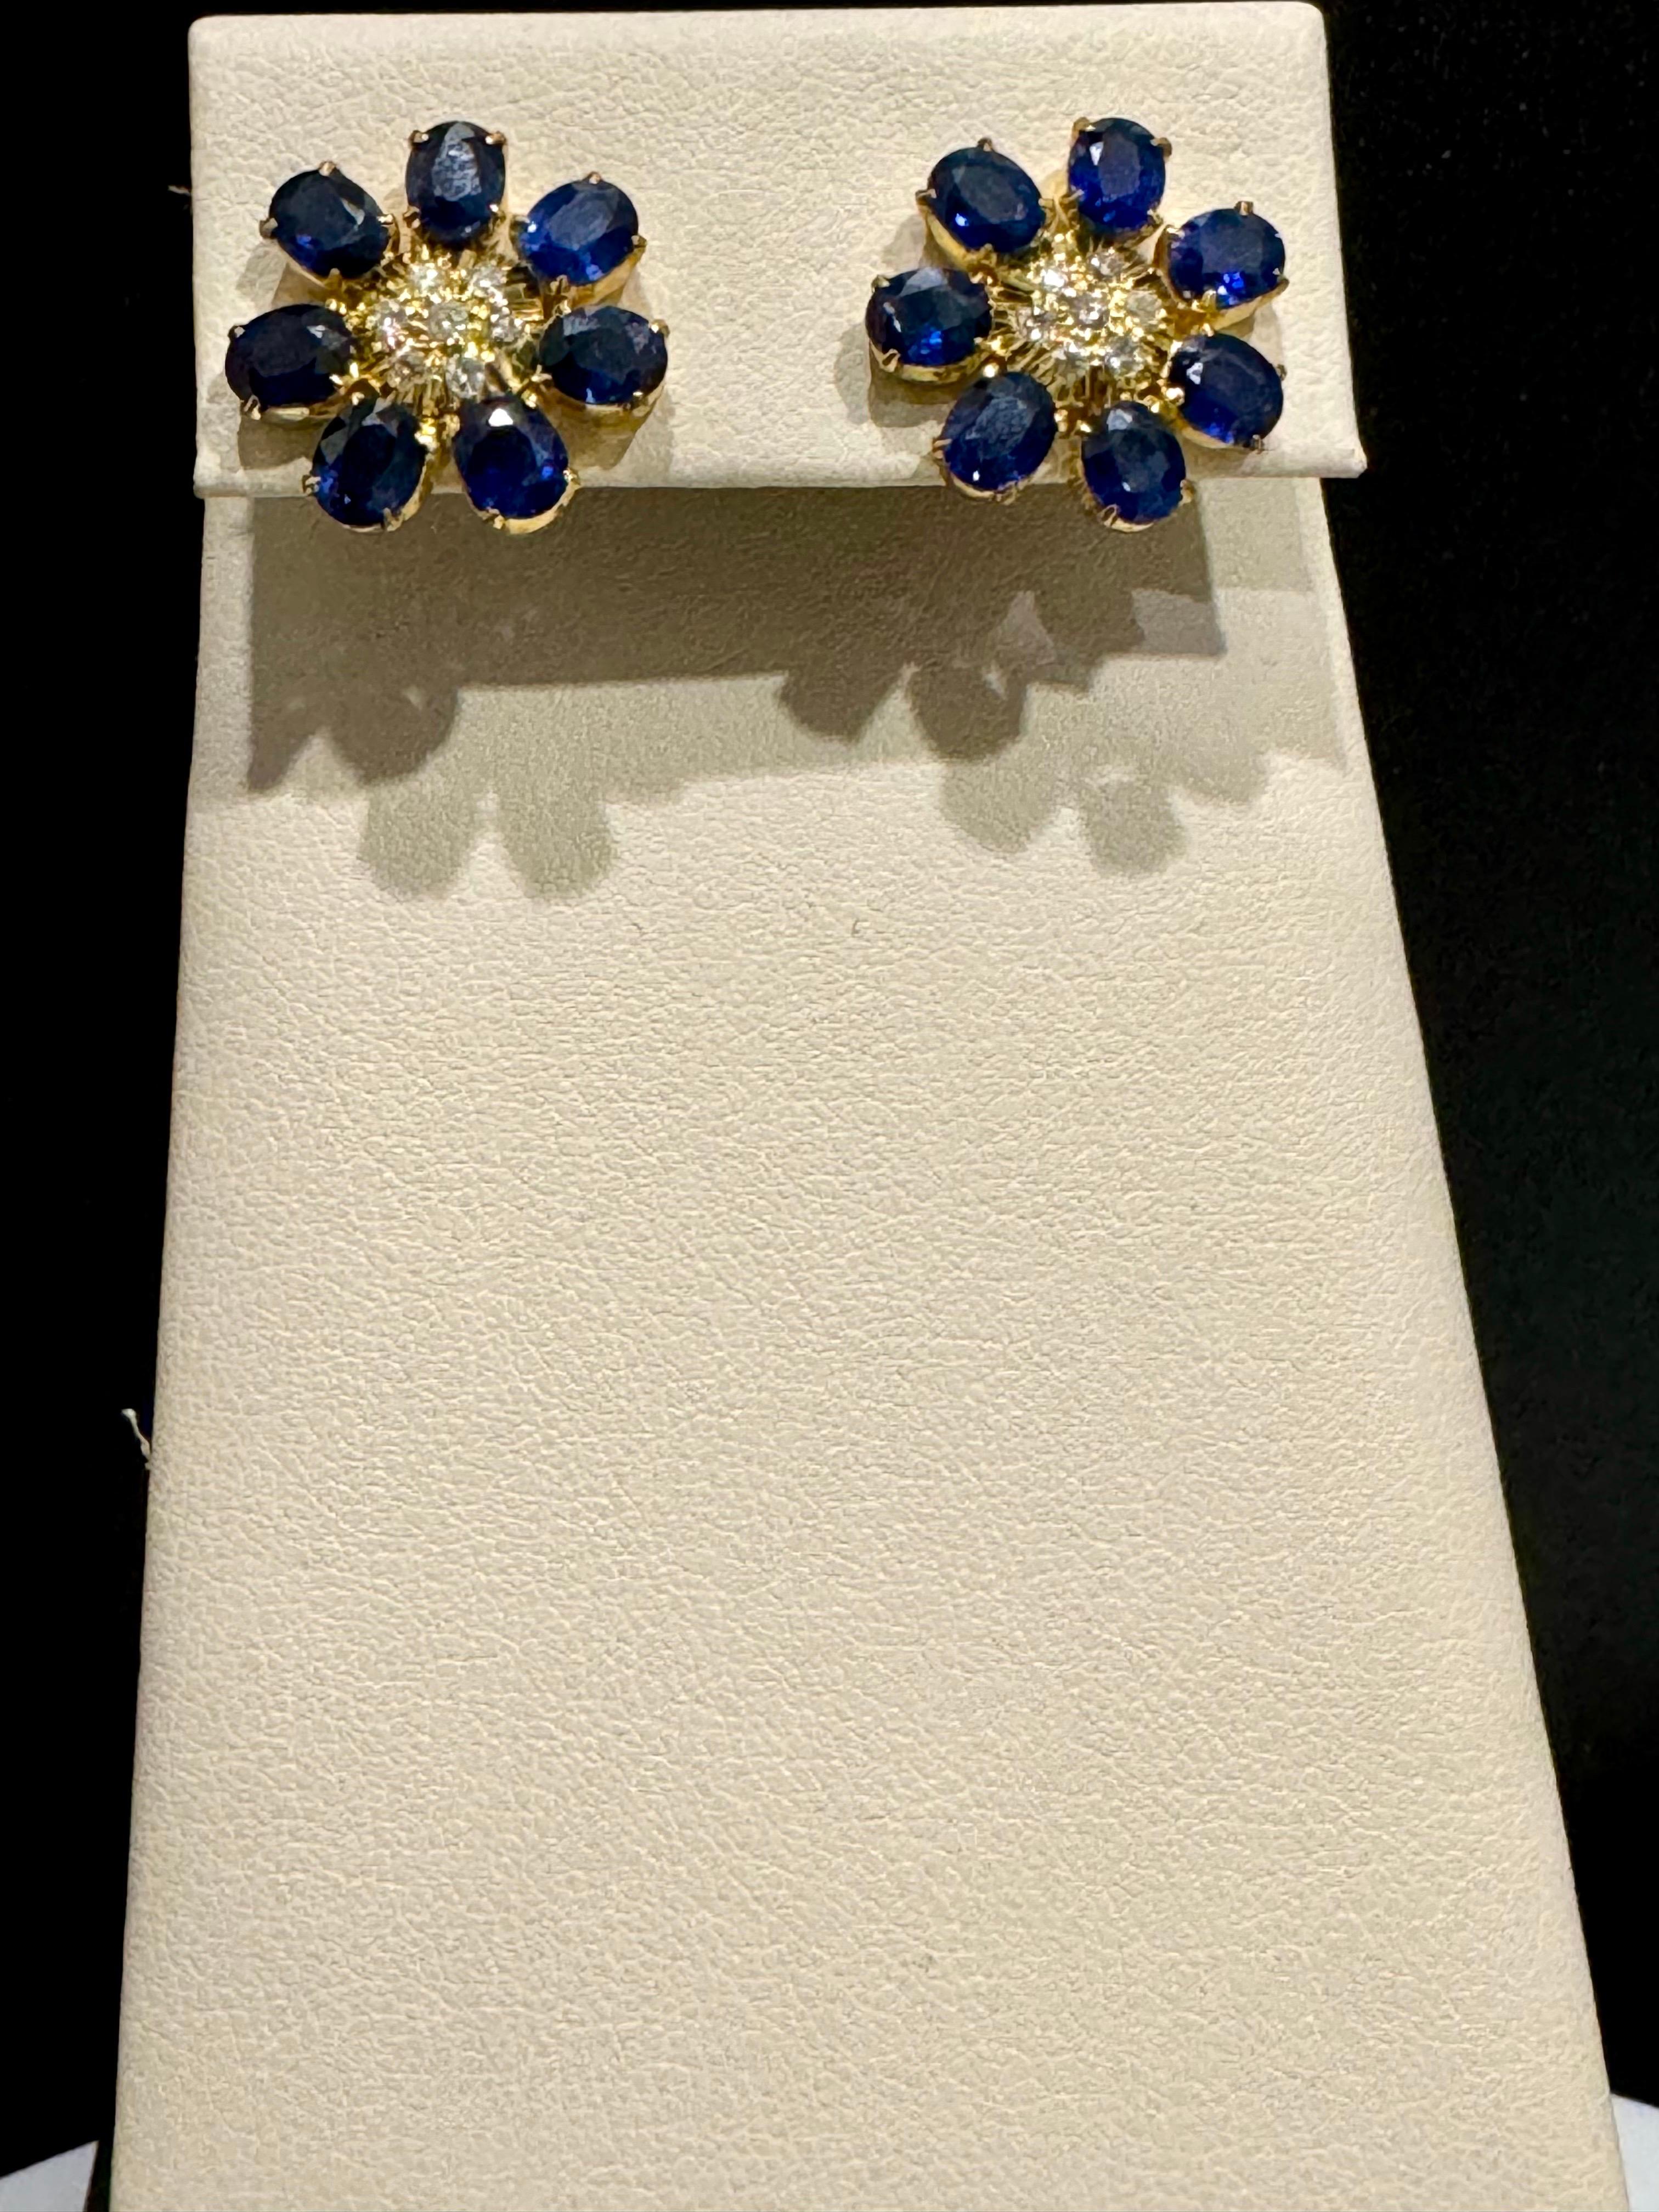 7 Petals Natural Sapphire and Diamonds Flower Post Earrings 18 Karat Yellow Gold
Approximately 4 Carat  Oval Cut Sapphire  and 0.30 ct  diamond flower earrings
 perfect pair  Post  back  Earrings  18 Karat Yellow Gold 
This exquisite pair of